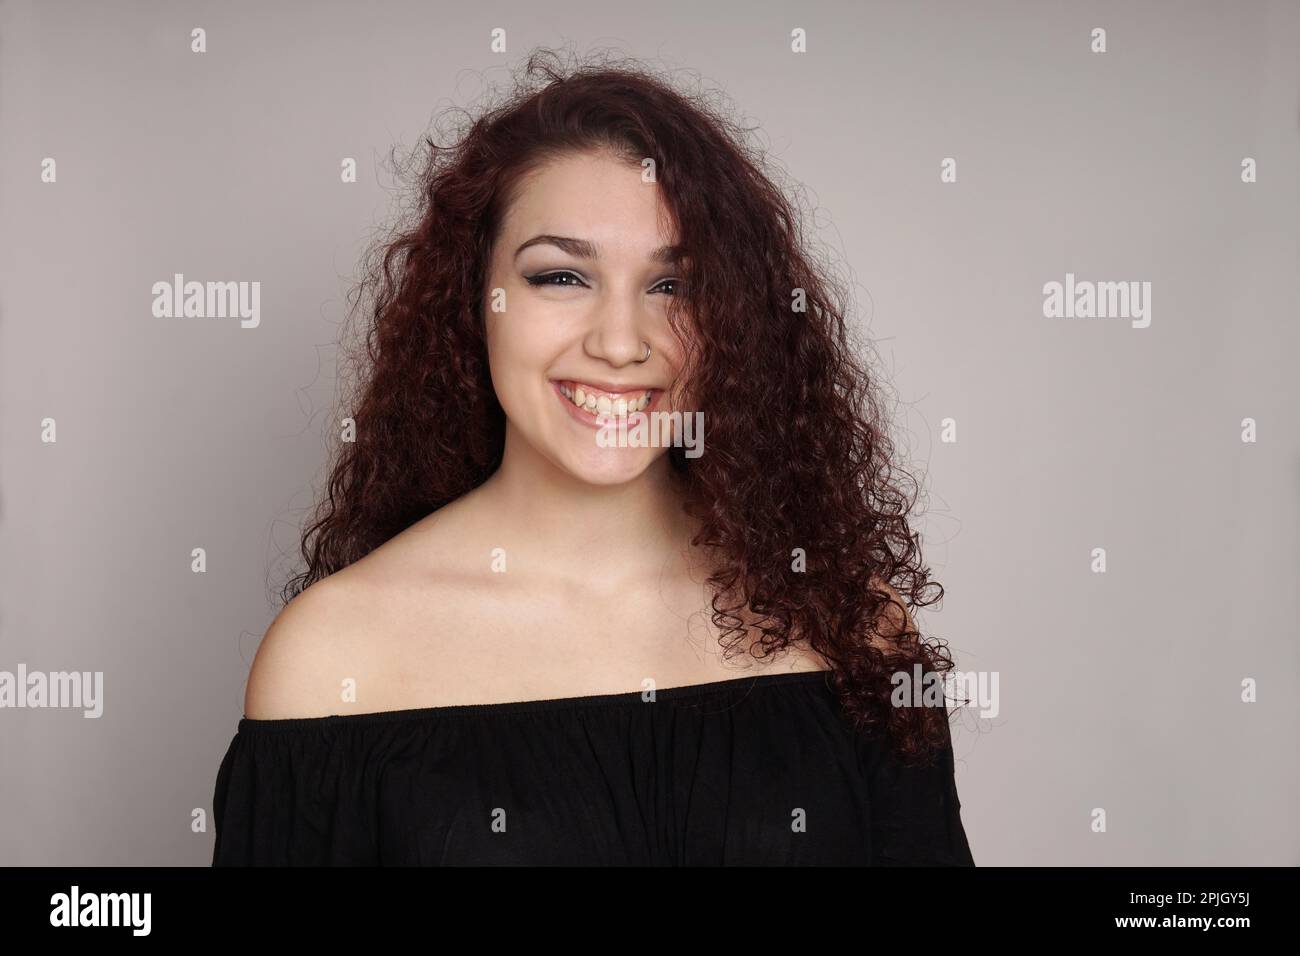 happy teenage girl with long curly hair and a big grin Stock Photo